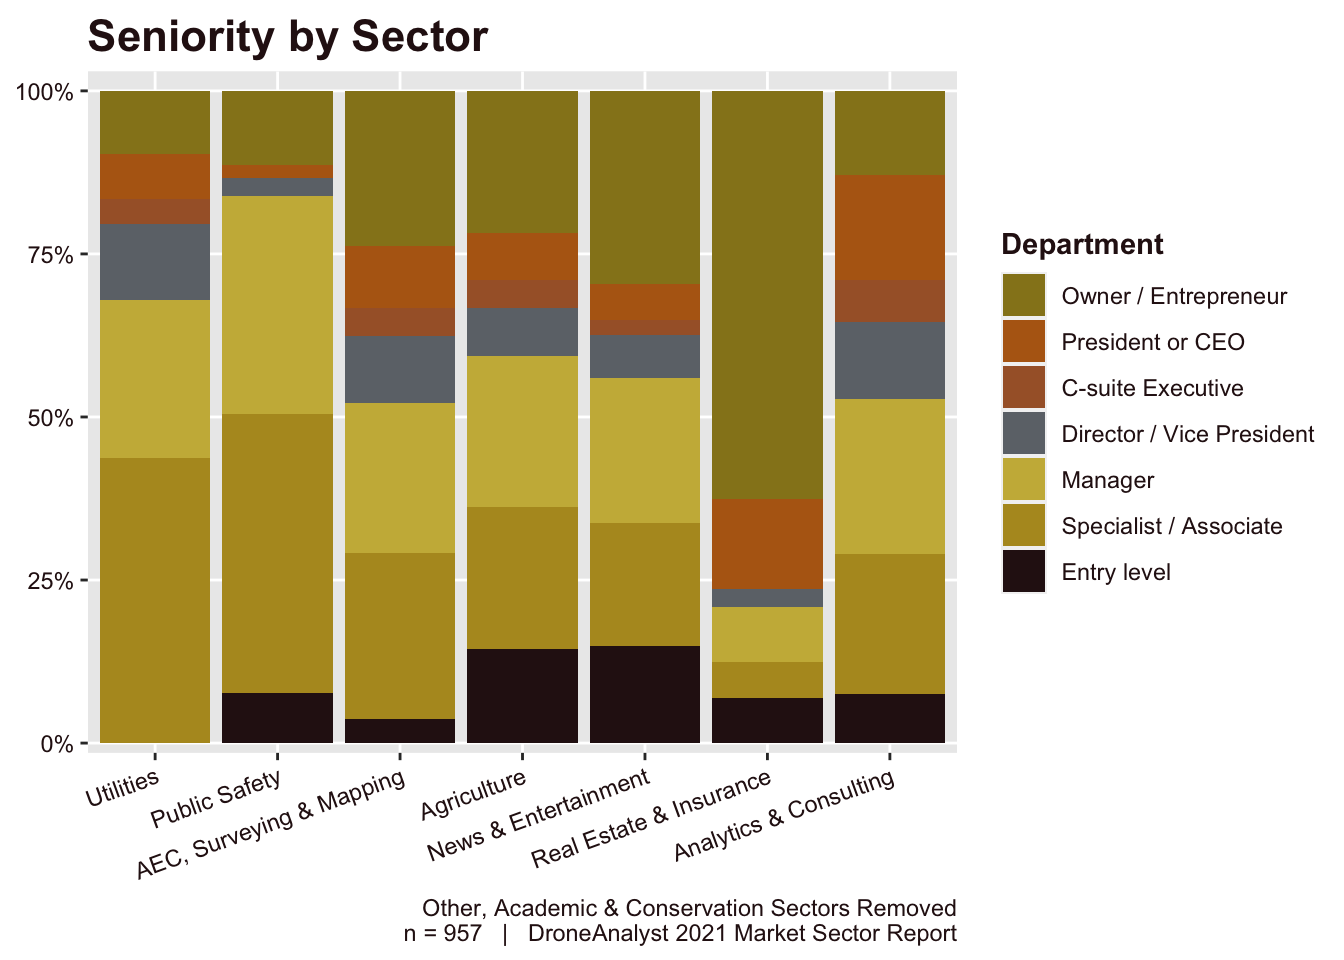 Seniority by Sector